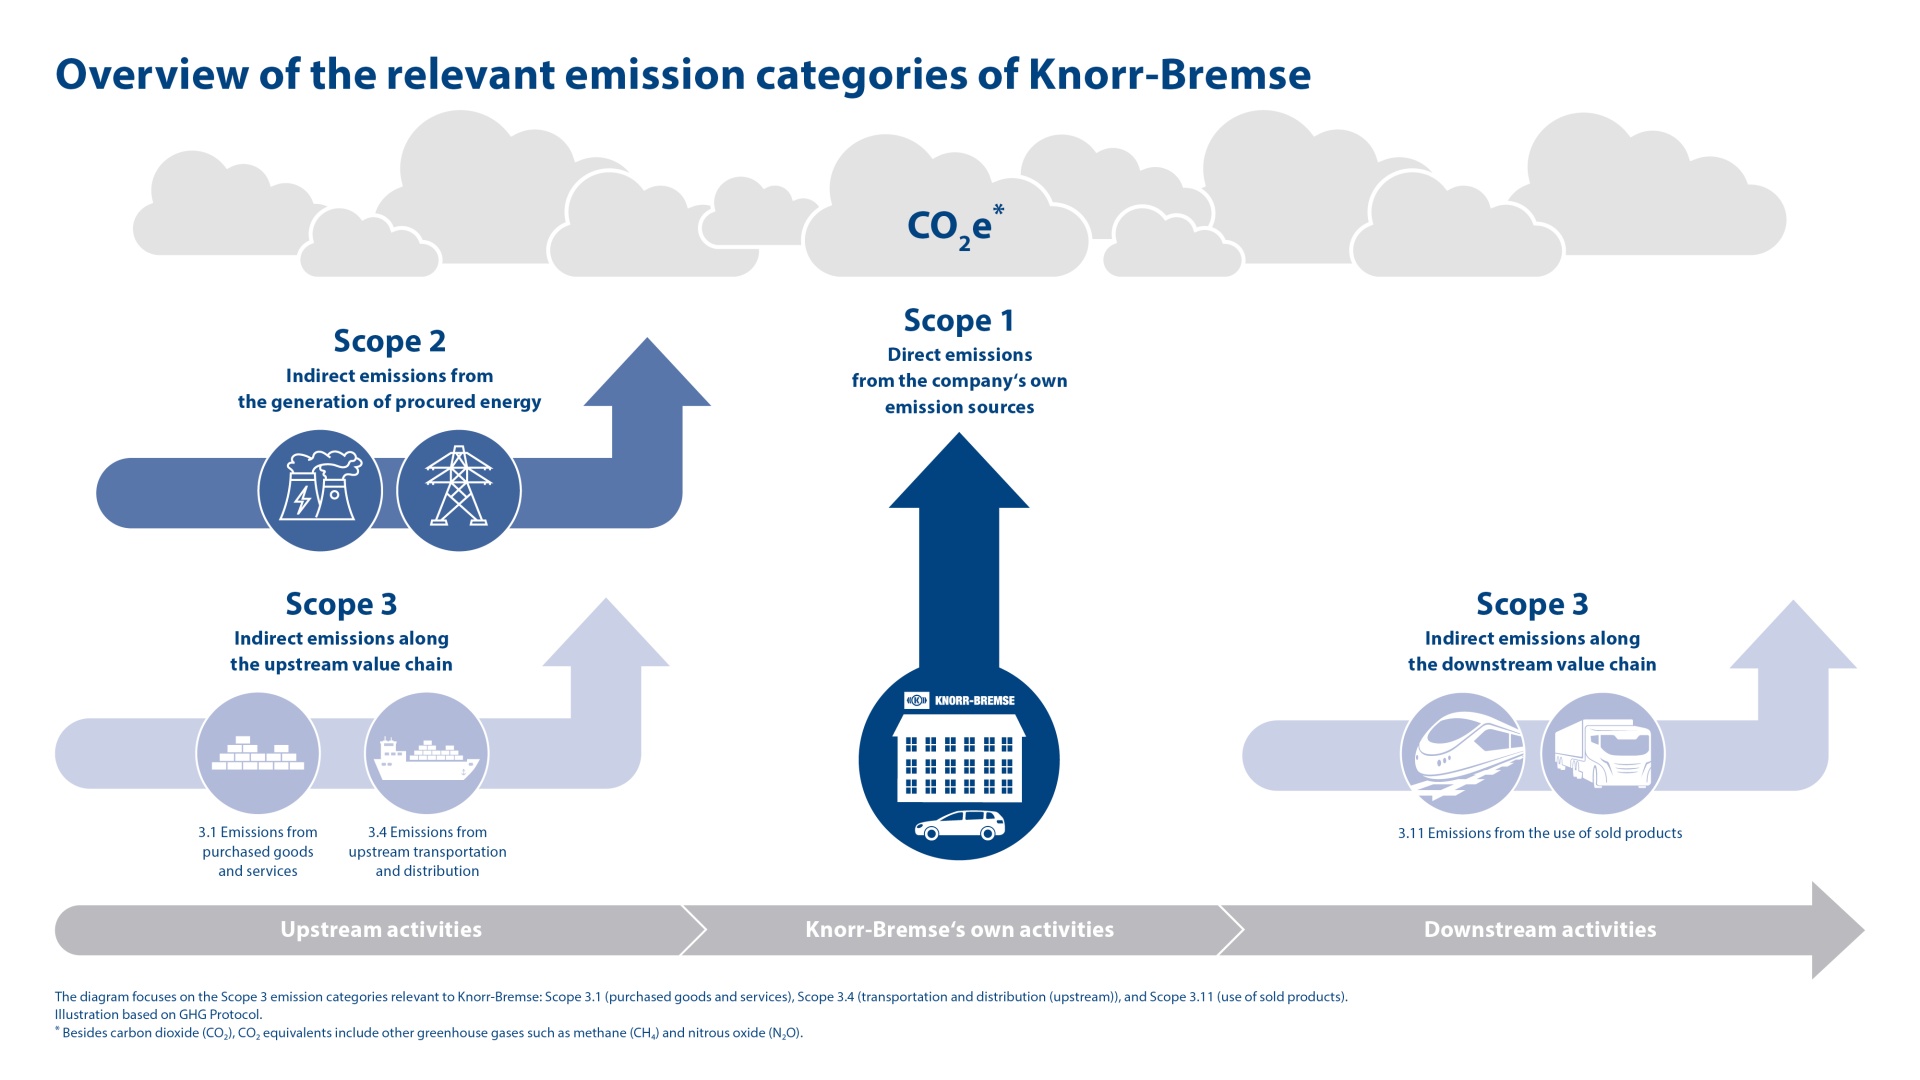 Graphic representation of the relevant emission categories (Scope 1 to Scope 3) of Knorr-Bremse